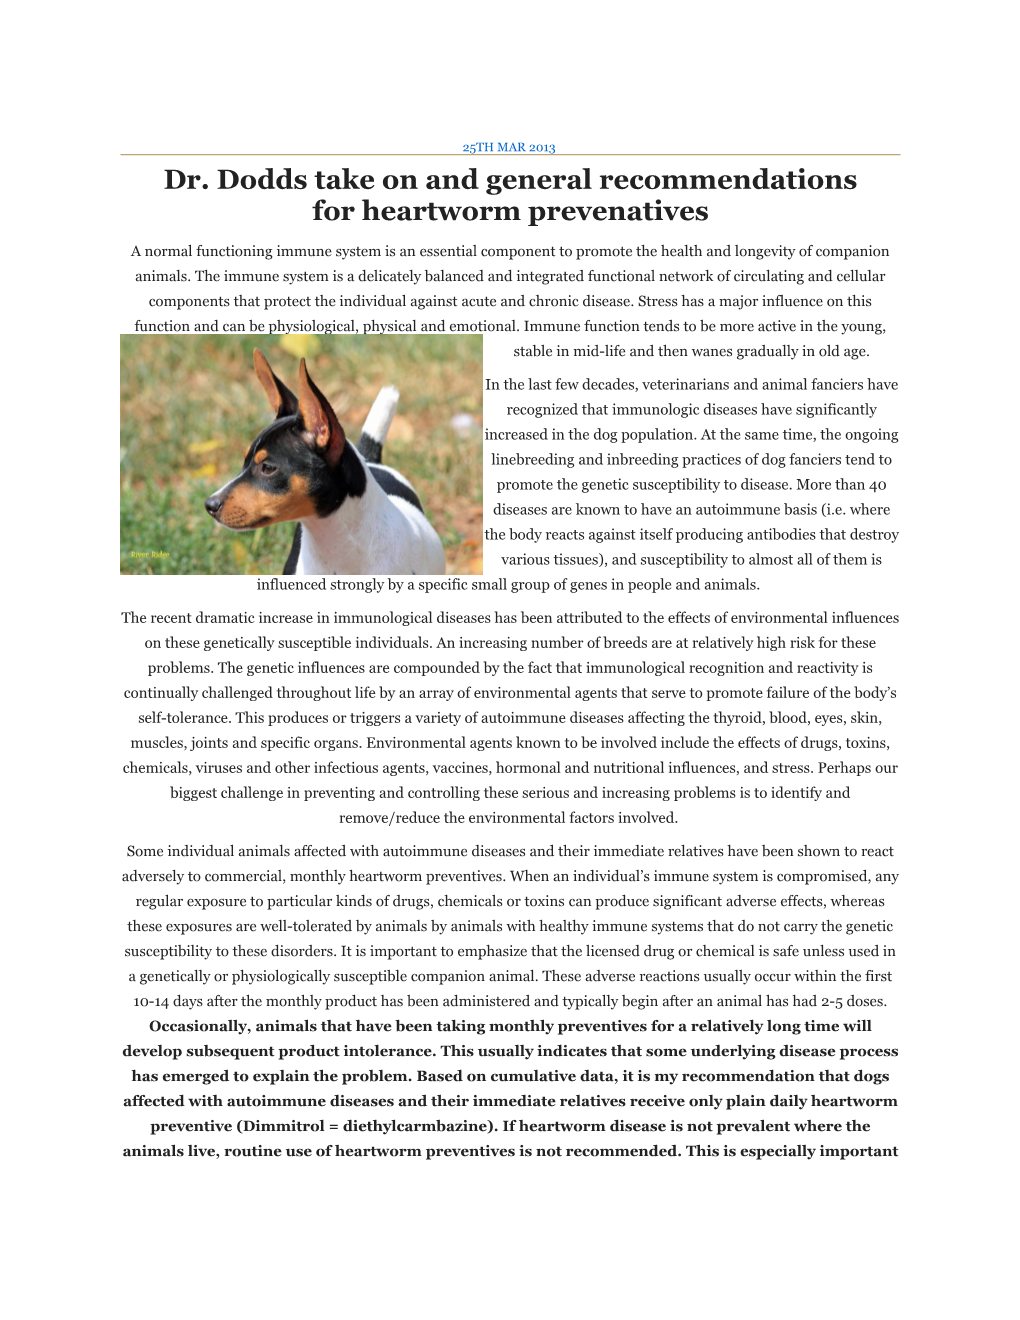 Dr. Dodds Take on and General Recommendations for Heartworm Prevenatives